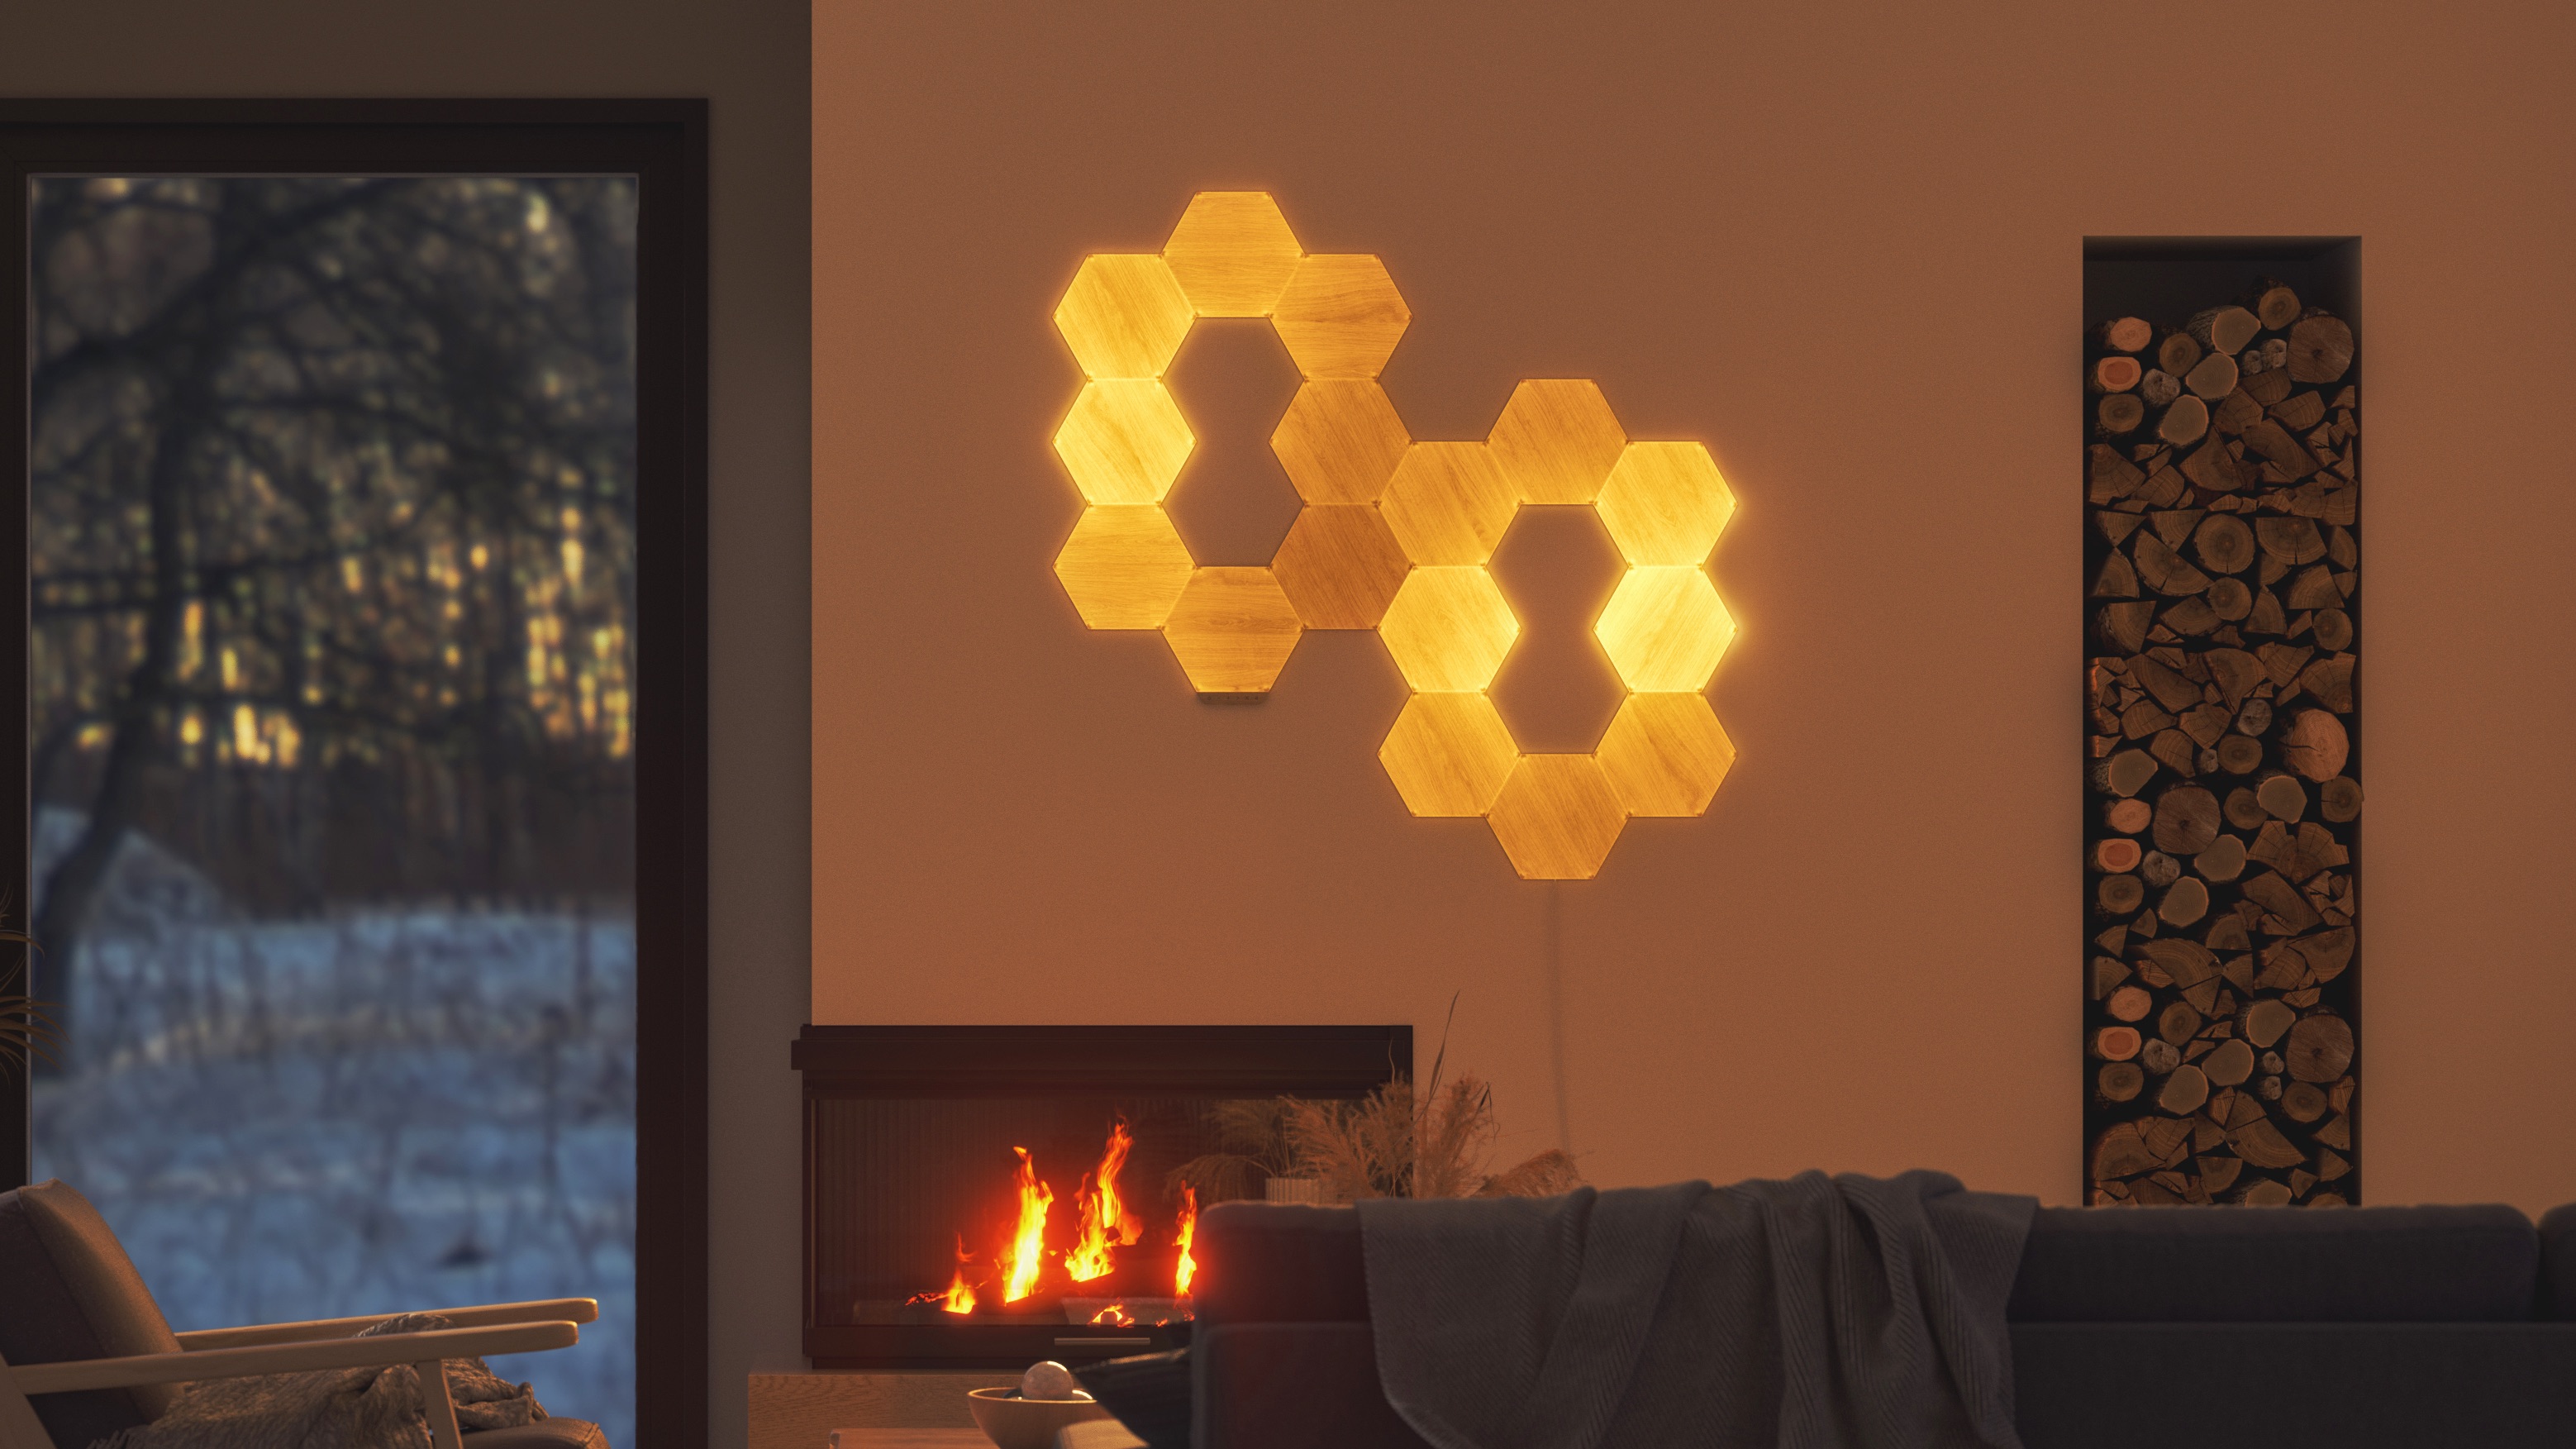 Review: Nanoleaf’s Wood-Style Hexagons Add Attractive Accent Lighting to Any Room